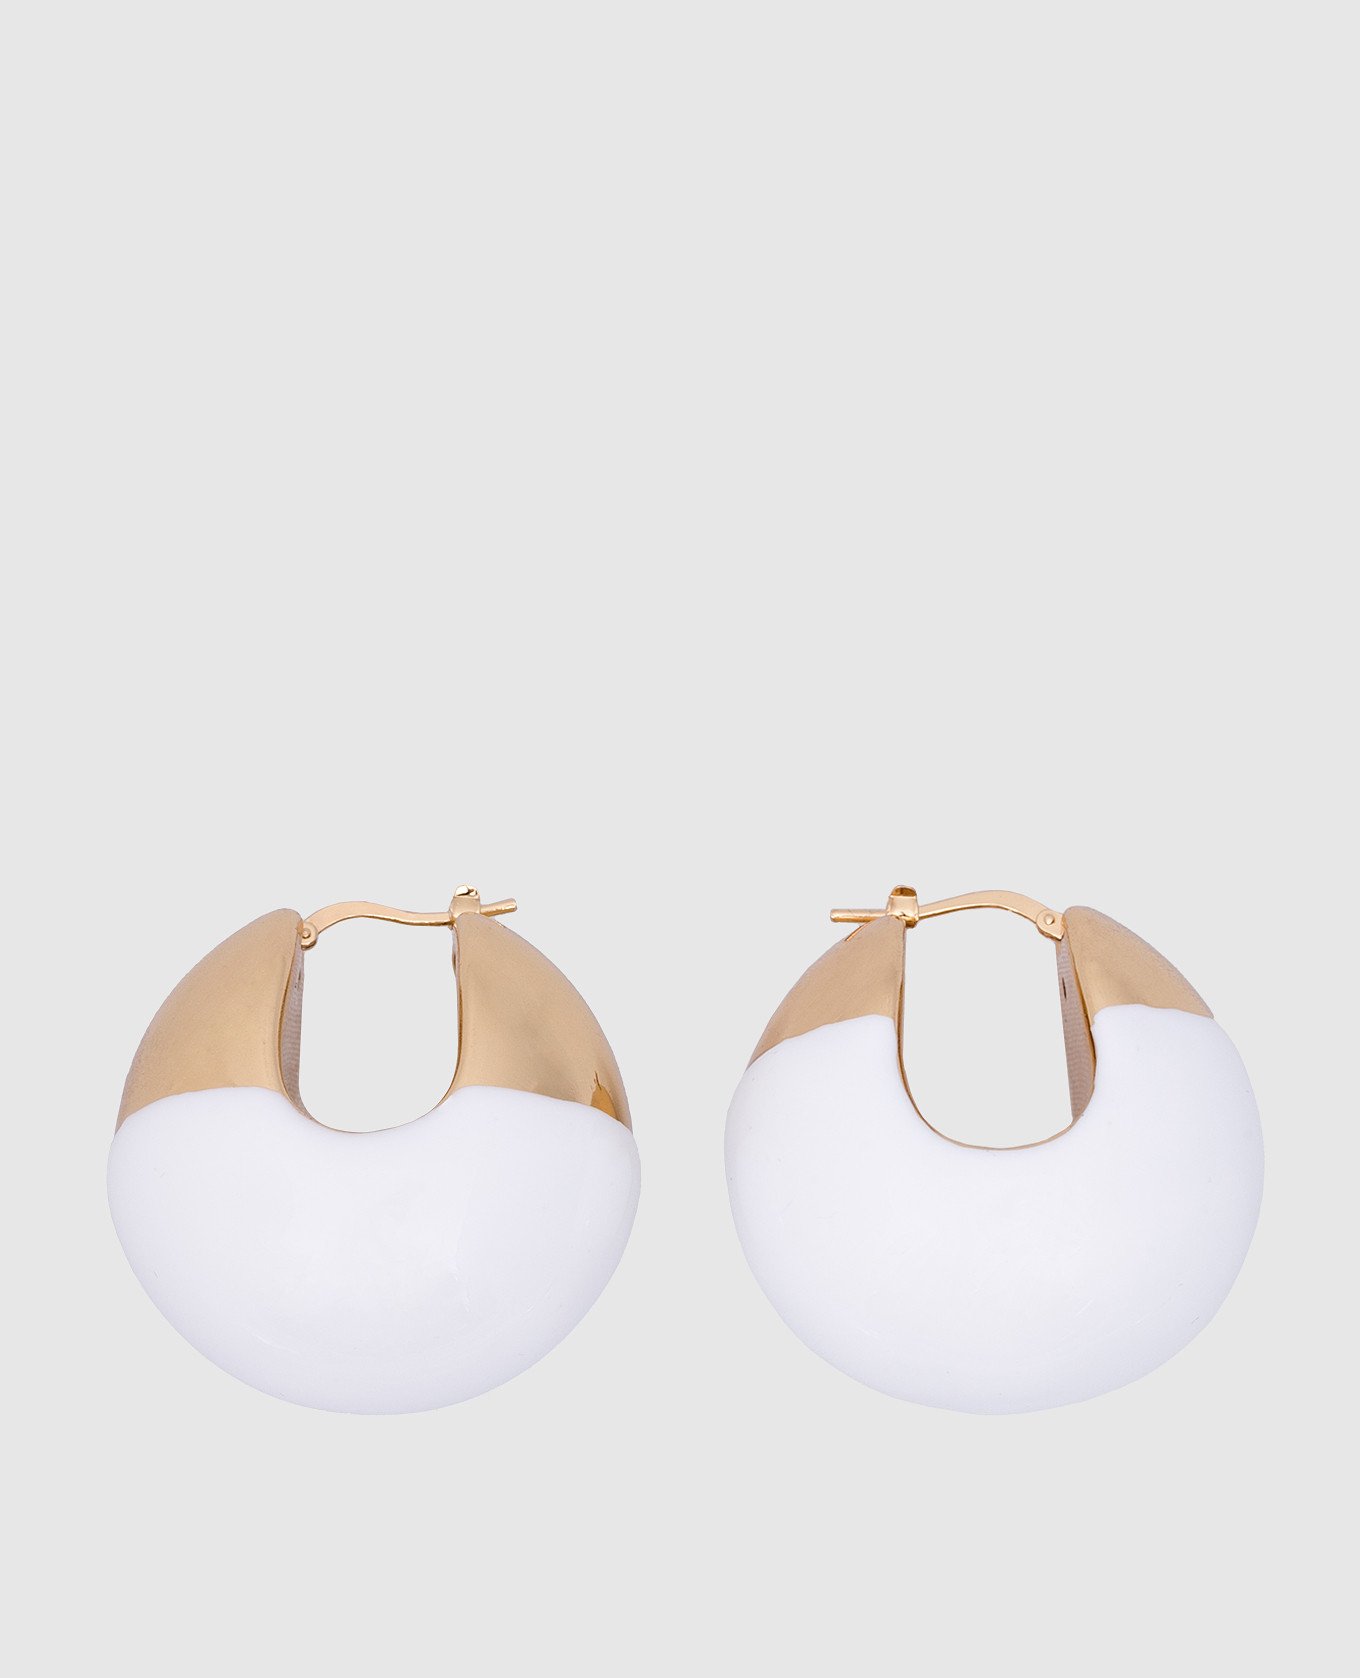 White Boule earrings with 24k gold plating